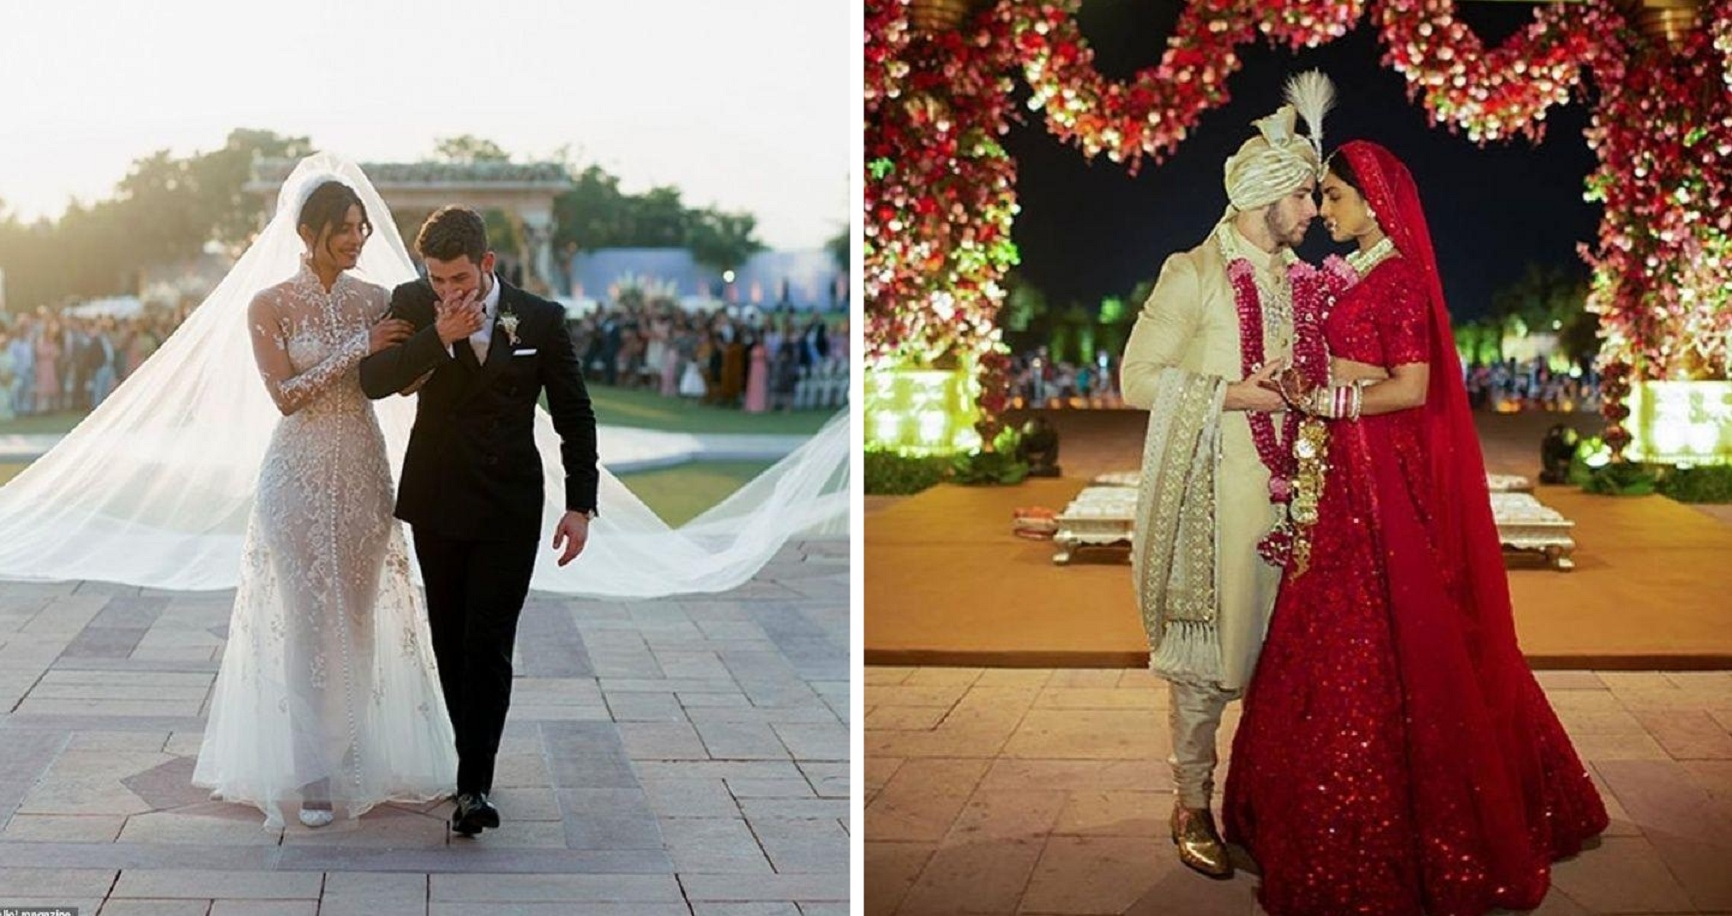 Priyanka Chopra & Nick Jonas: Official Wedding Photos Are Finally Here And They’re Absolutely Stunning!